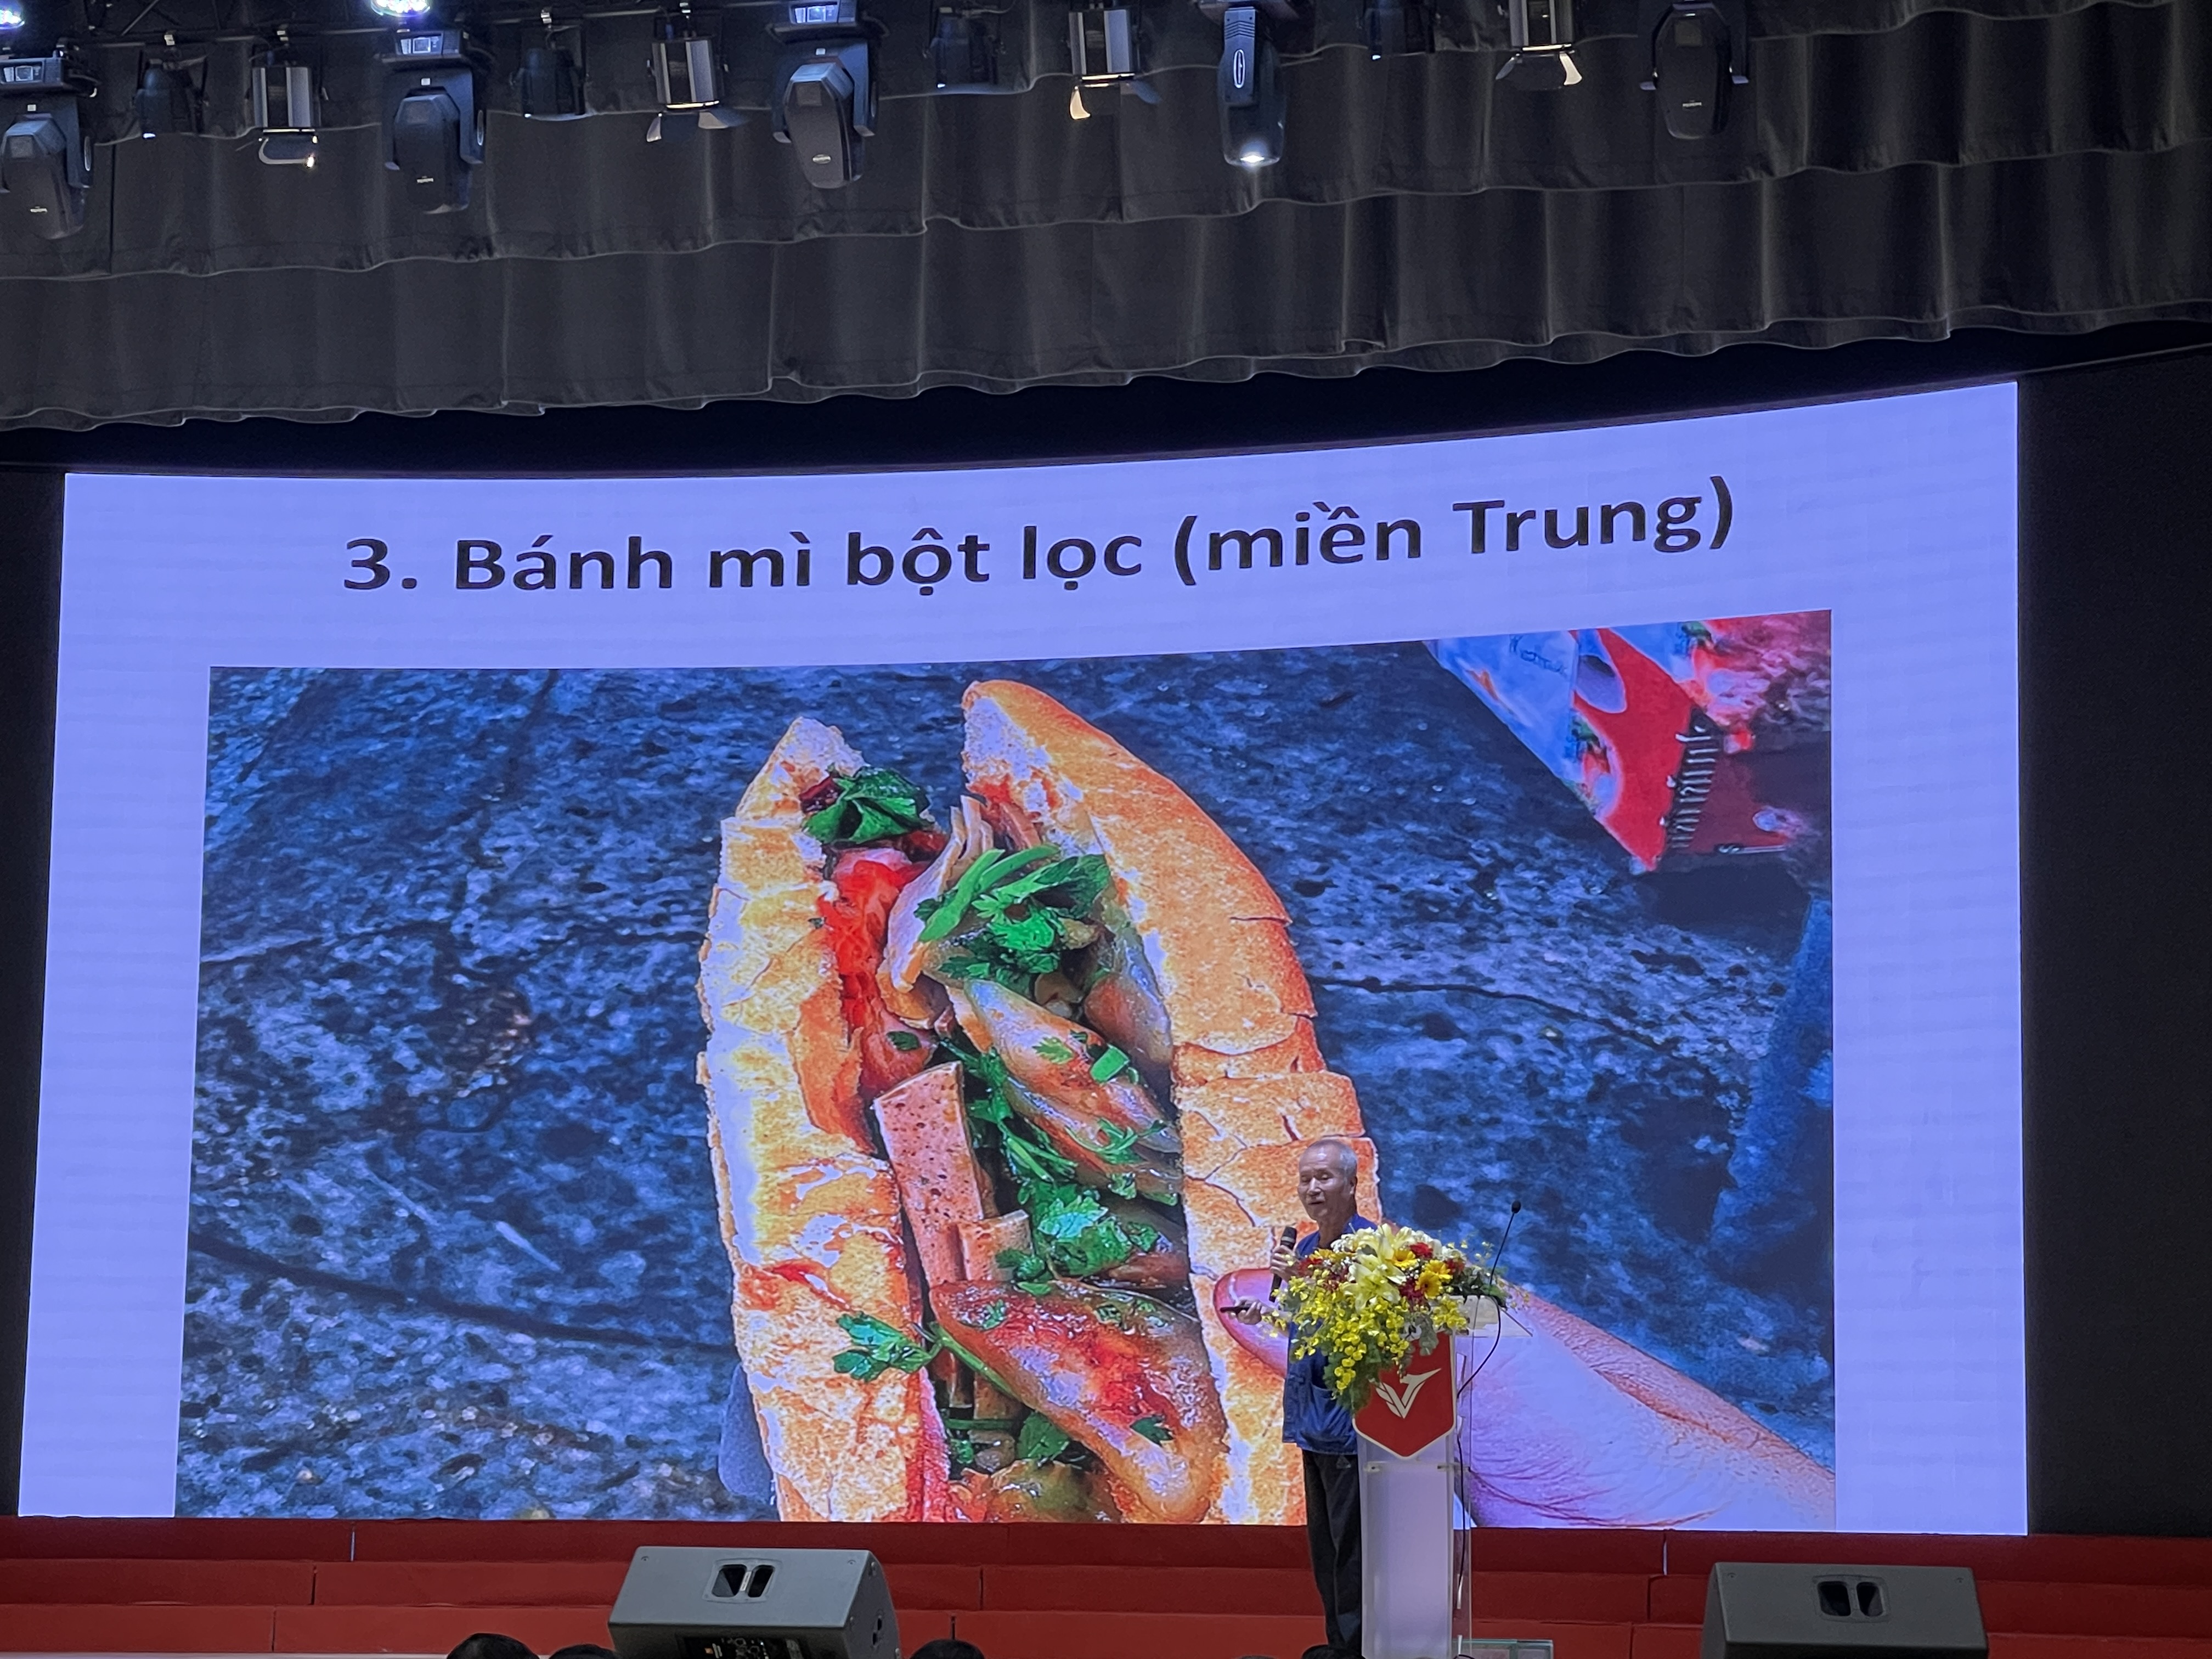 Historian Vu The Long speaks at the conference on the background photo of a ‘banh mi bot loc’ (banh mi stuffed with Vietnamese tapioca dumplings) which can be found in the central region of Vietnam. Photo: Photo: Dong Nguyen / Tuoi Tre News